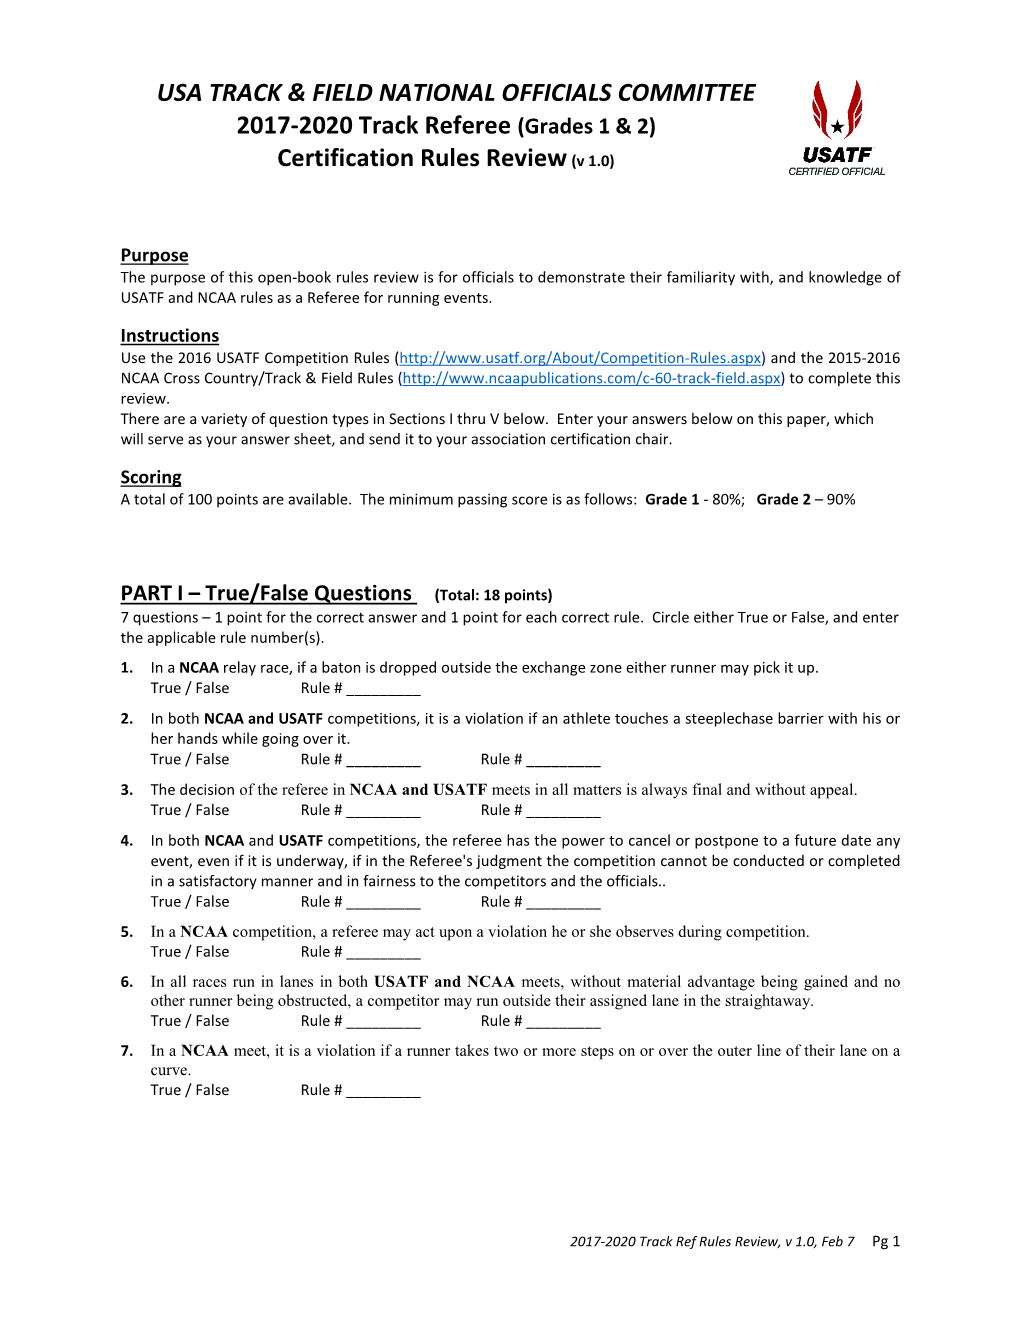 Track Referee (Grades 1 & 2) Certification Rules Review (V 1.0)